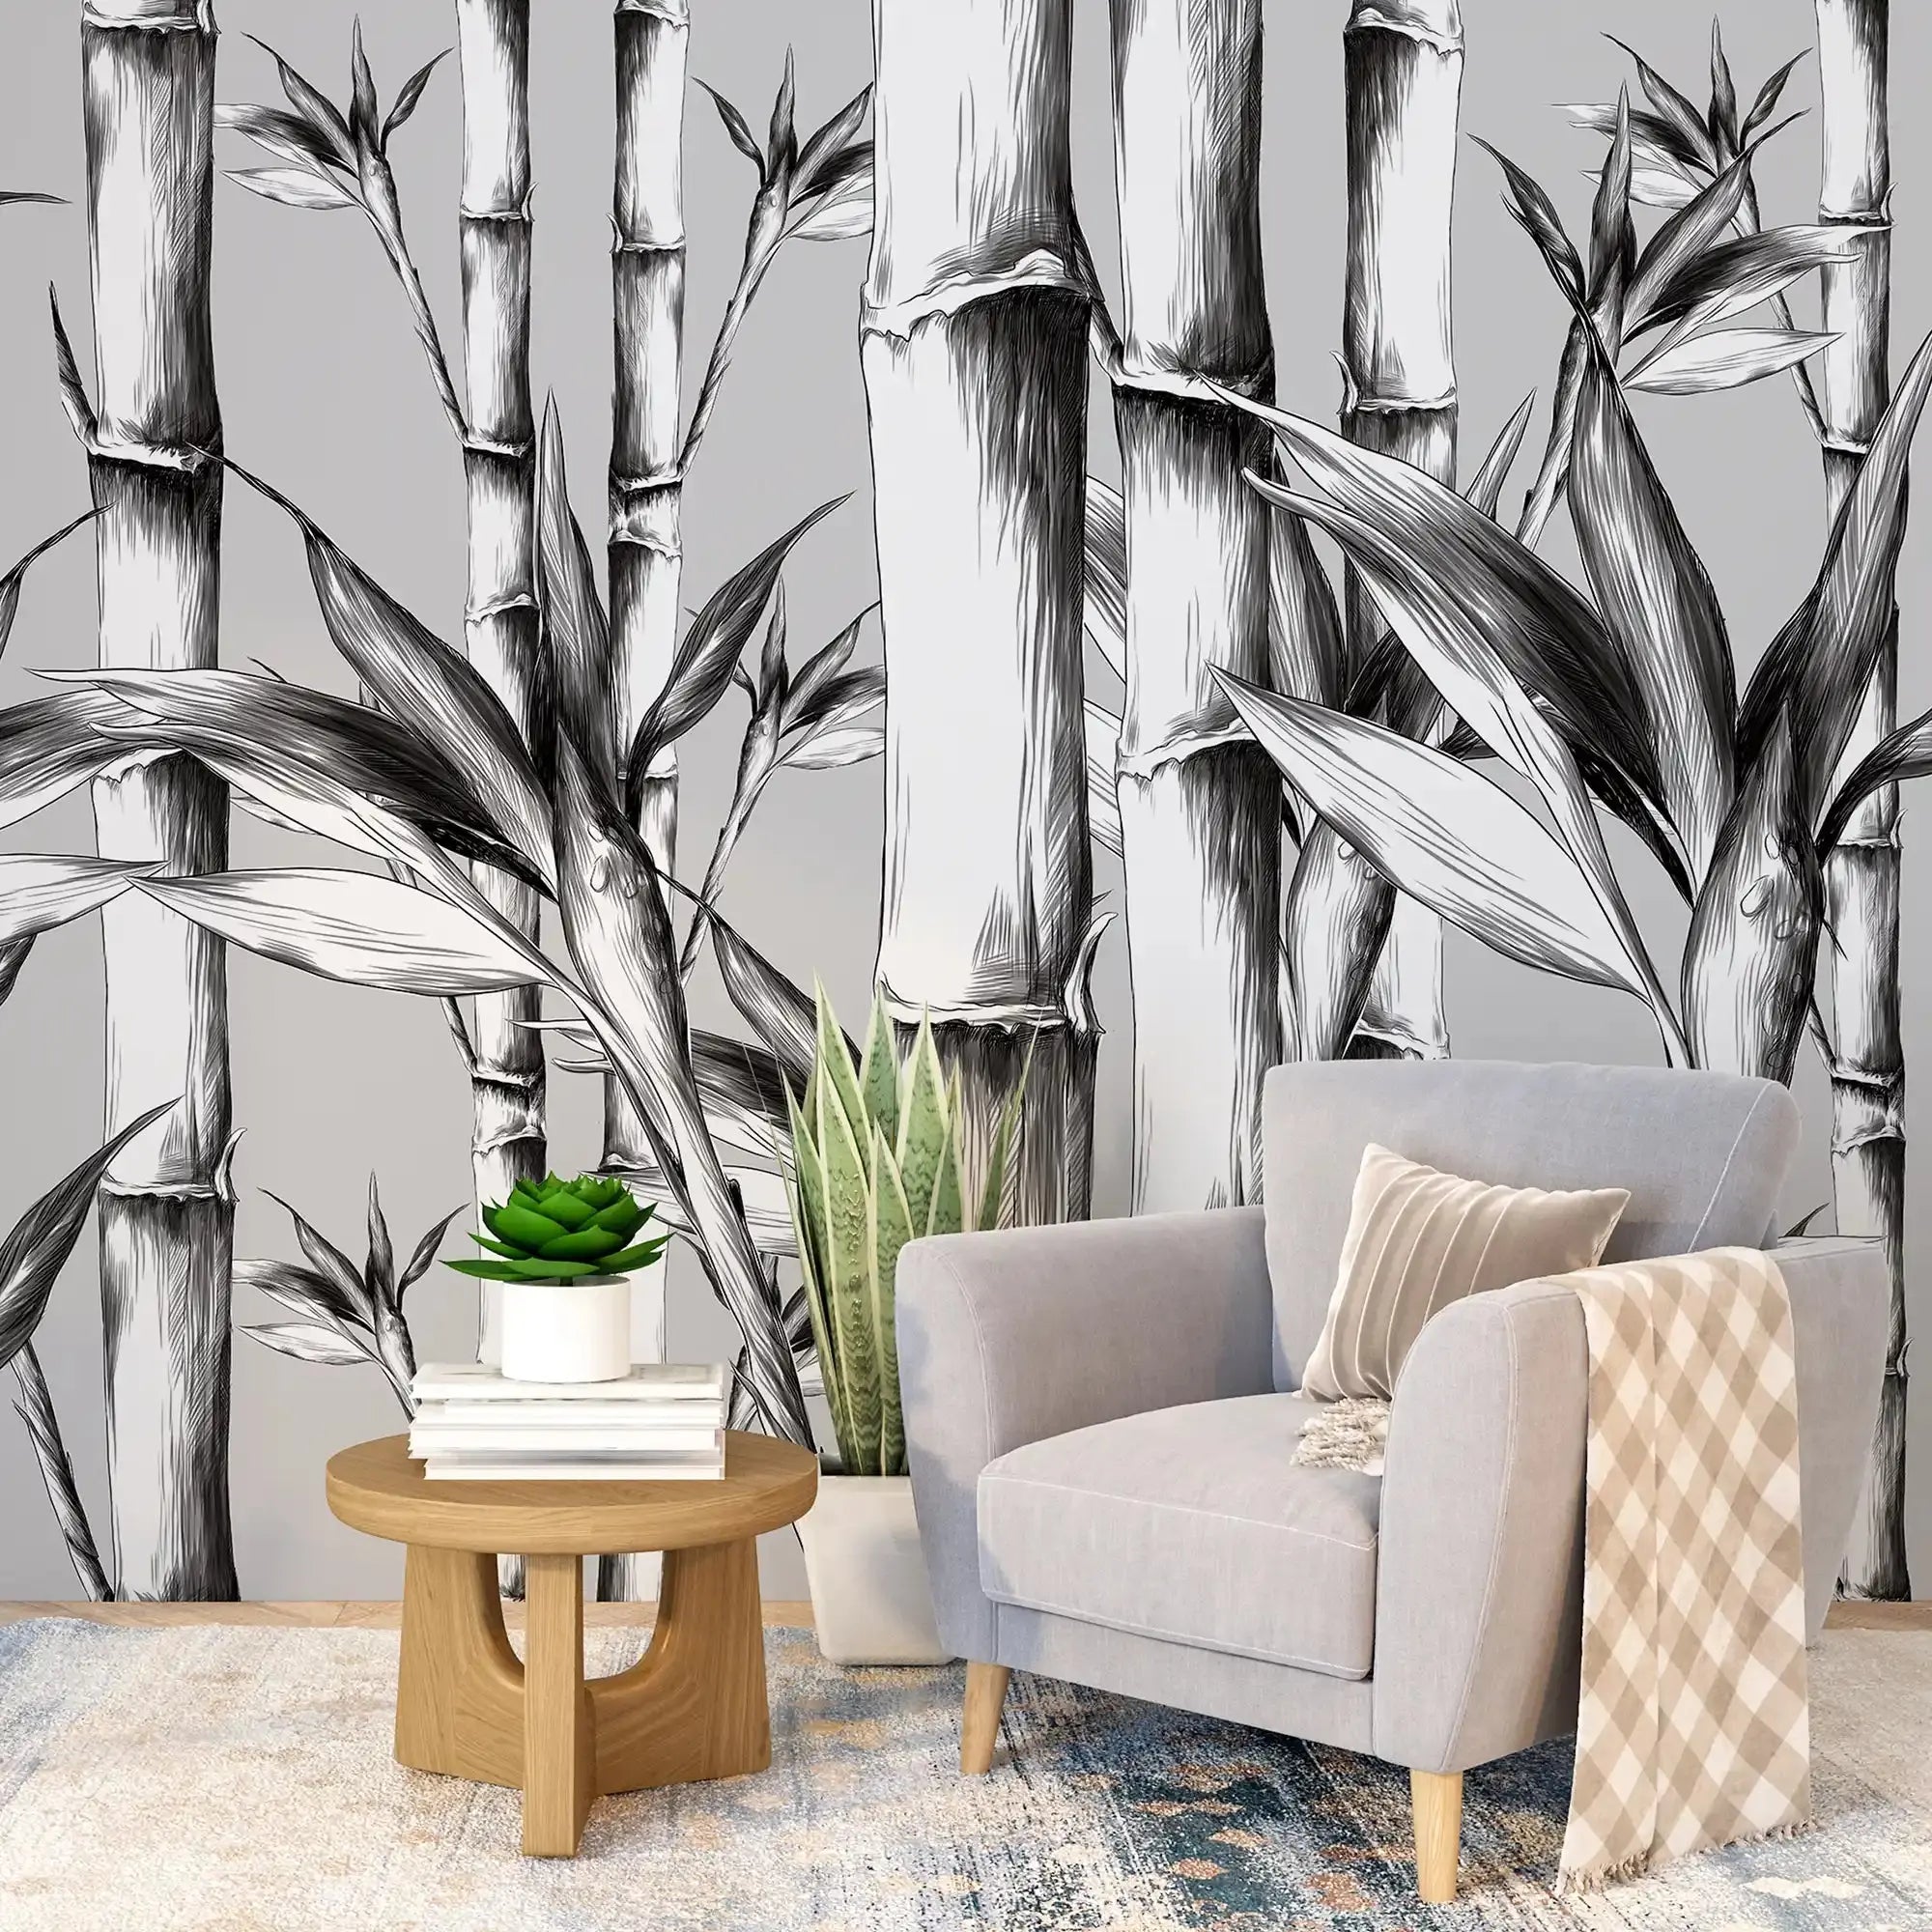 3098-A / Peel and Stick Wallpaper: Modern Bamboo Pattern, Easy Install for Kitchen and Bathroom, Removable Wallpaper - Artevella